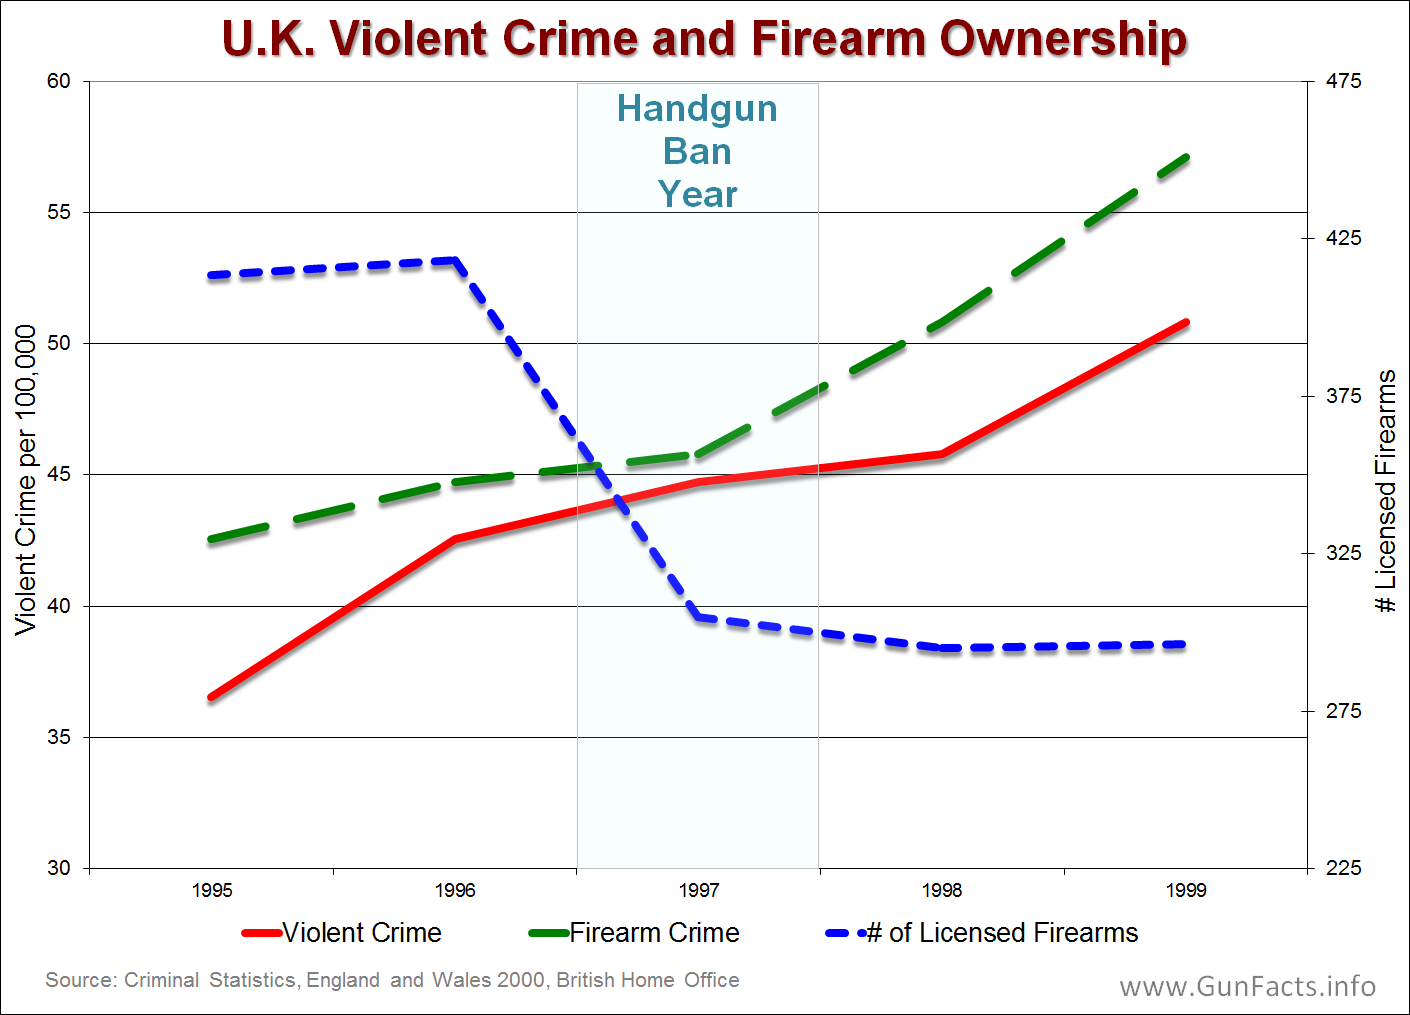 GUNS-IN-OTHER-COUNTRIES-U.K.-Violent-Crime-and-Firearm-Ownership-Rates-Before-and-After-1997.png